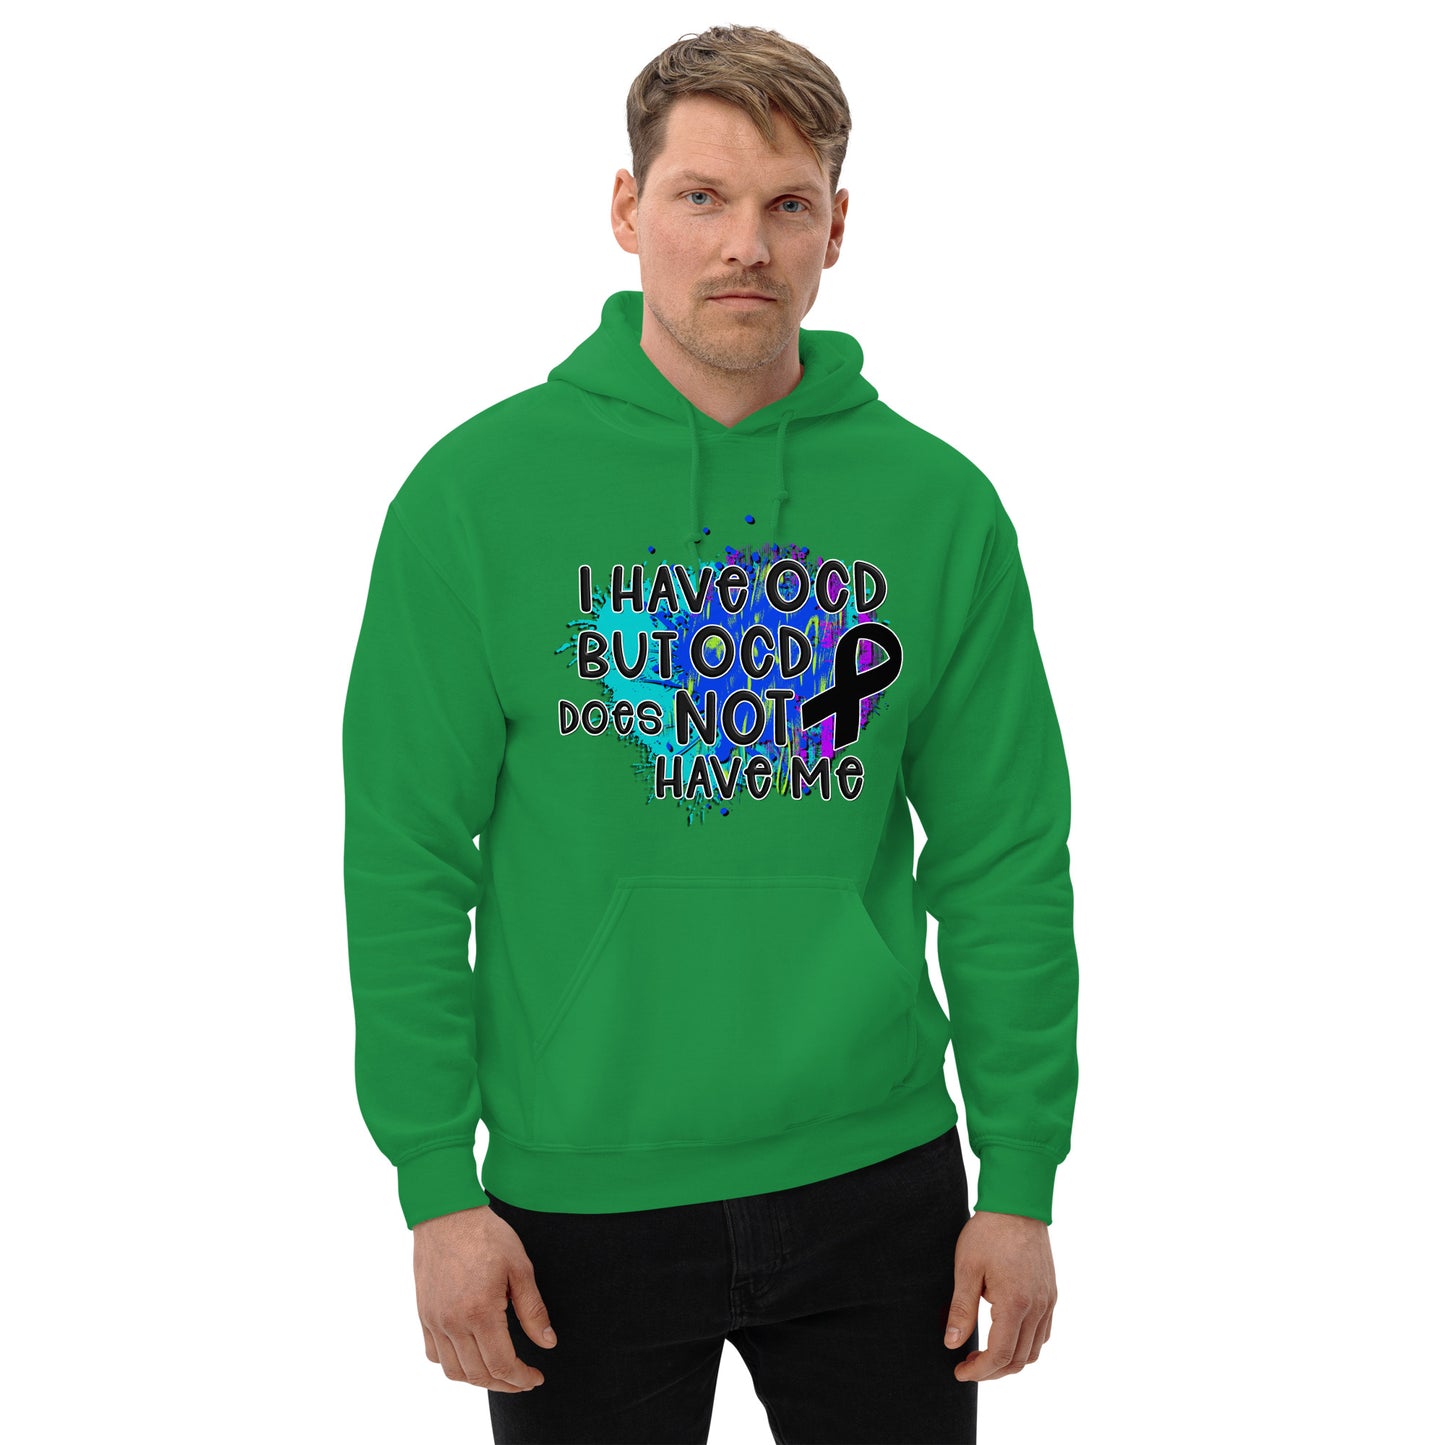 I HAVE OCD BUT OCD DOESN'T HAVE ME- Unisex Hoodie